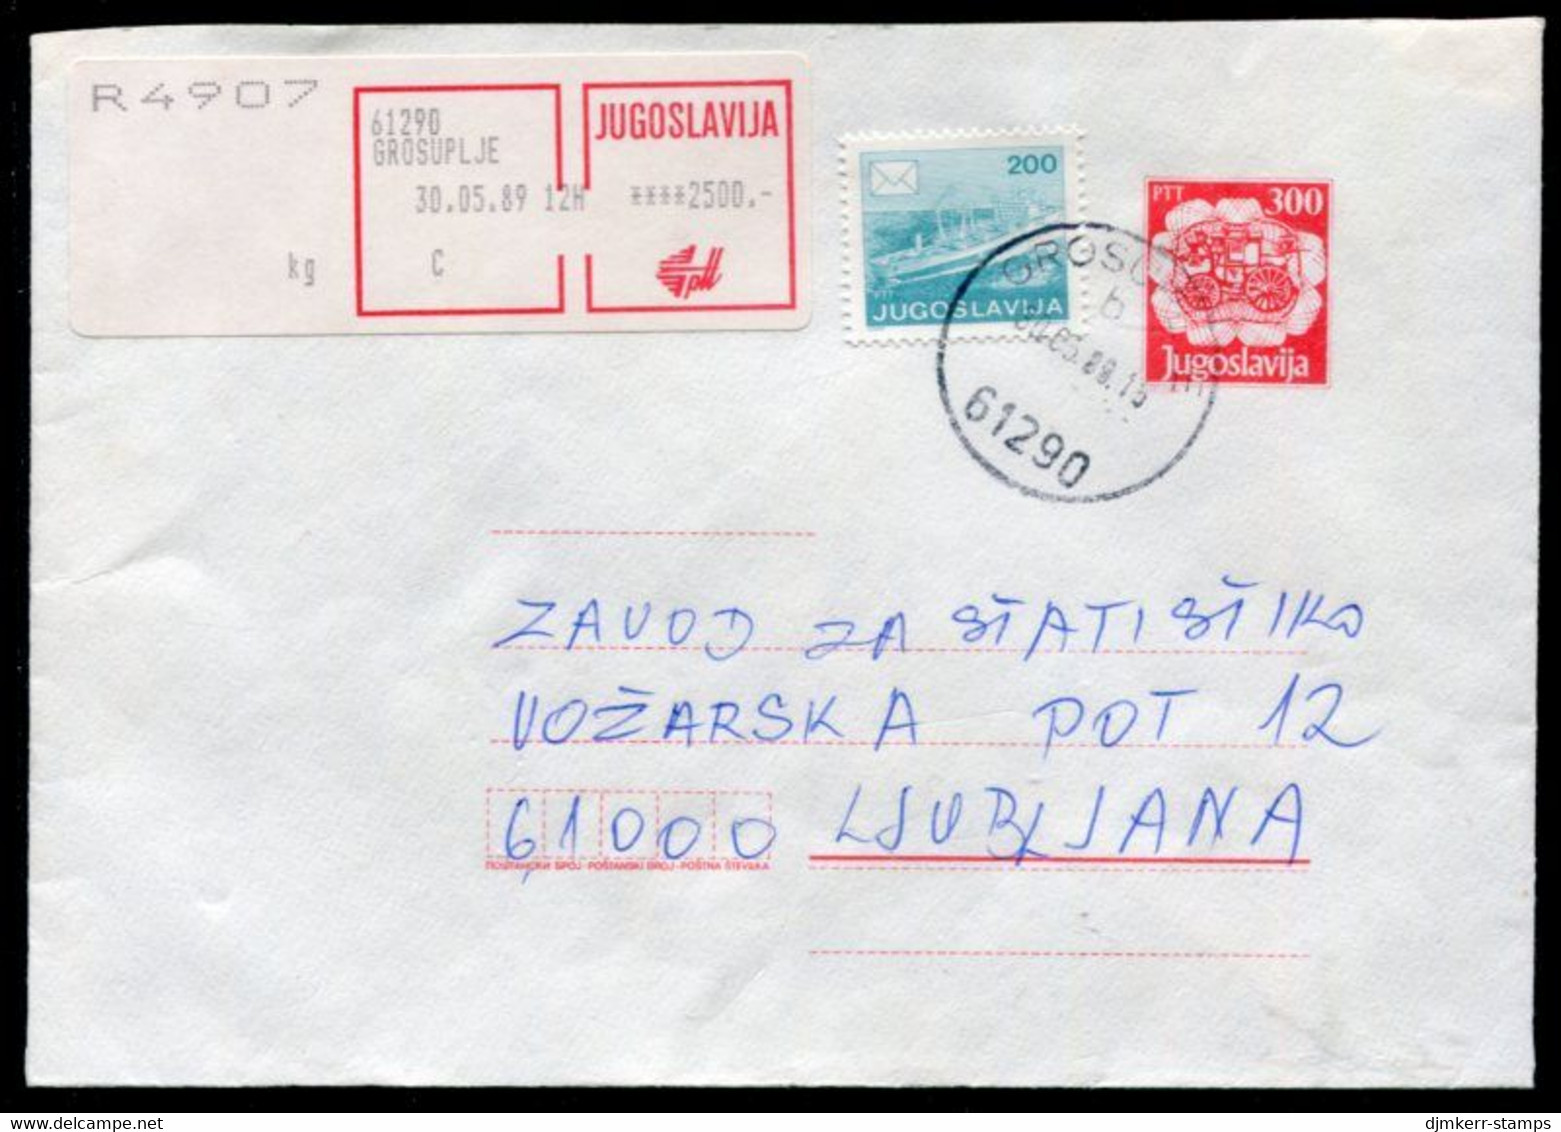 YUGOSLAVIA 1989 Mailcoach 300 D.stationery Envelope Registered With Additional Franking.  Michel U89 - Entiers Postaux